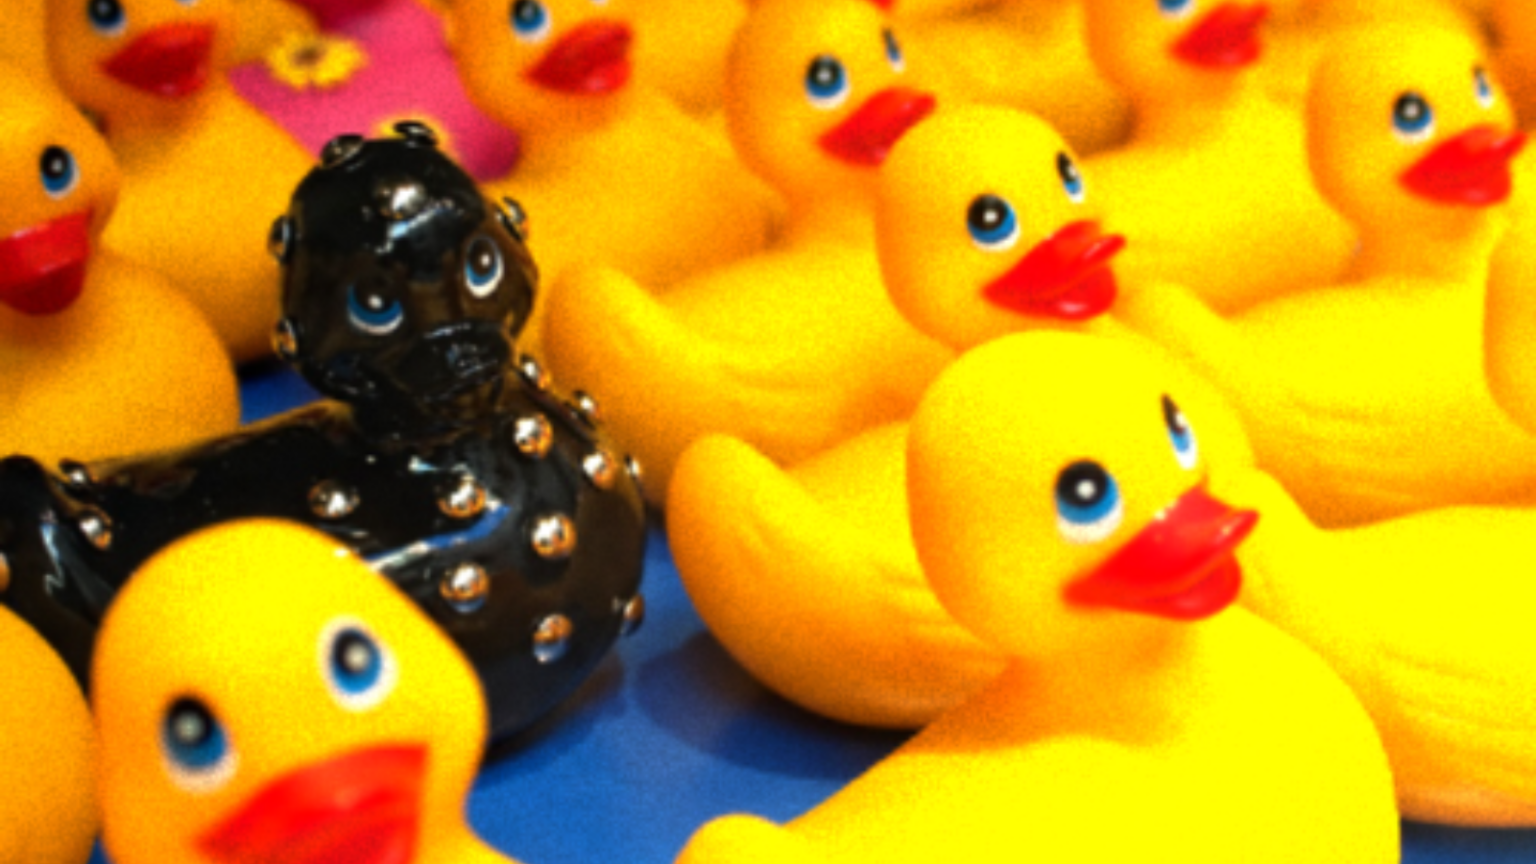 Rows of yellow rubber duckies with one black leather clad rubber ducky